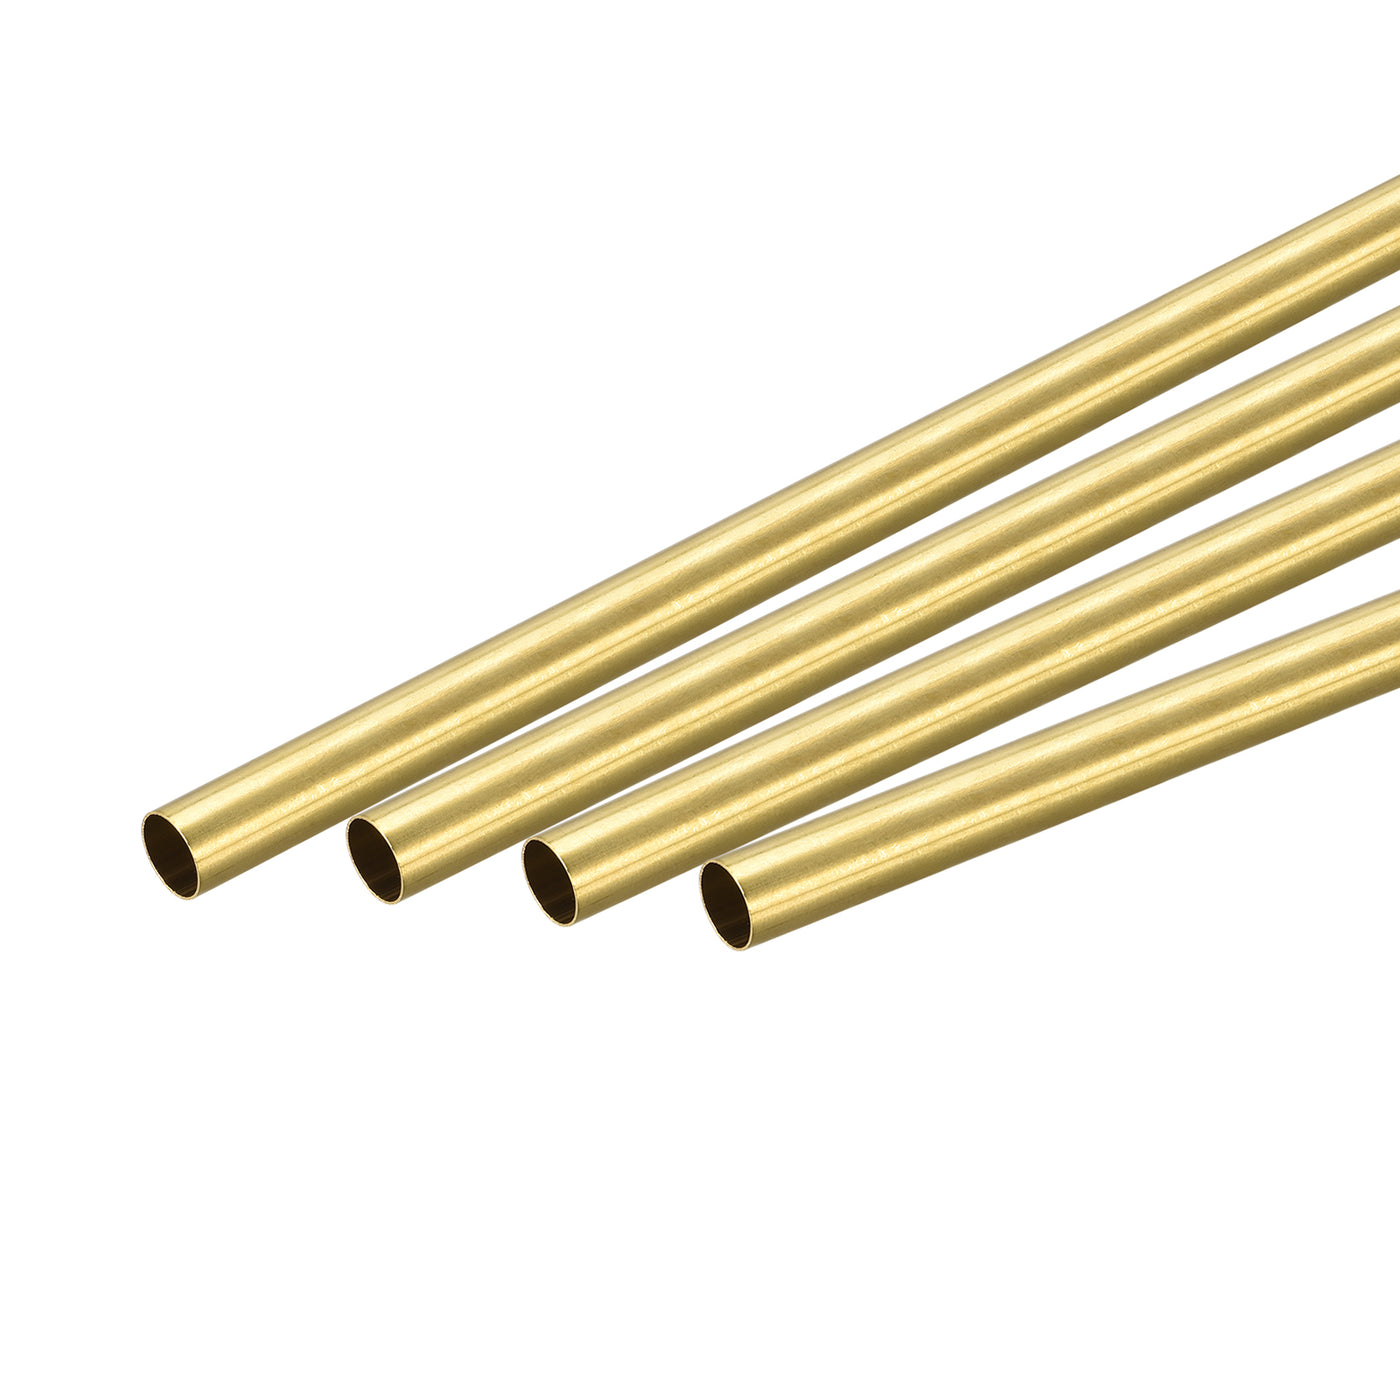 Uxcell Uxcell Brass Round Tube 9.5mm OD 0.25mm Wall Thickness 300mm Length Pipe Tubing 4 Pcs